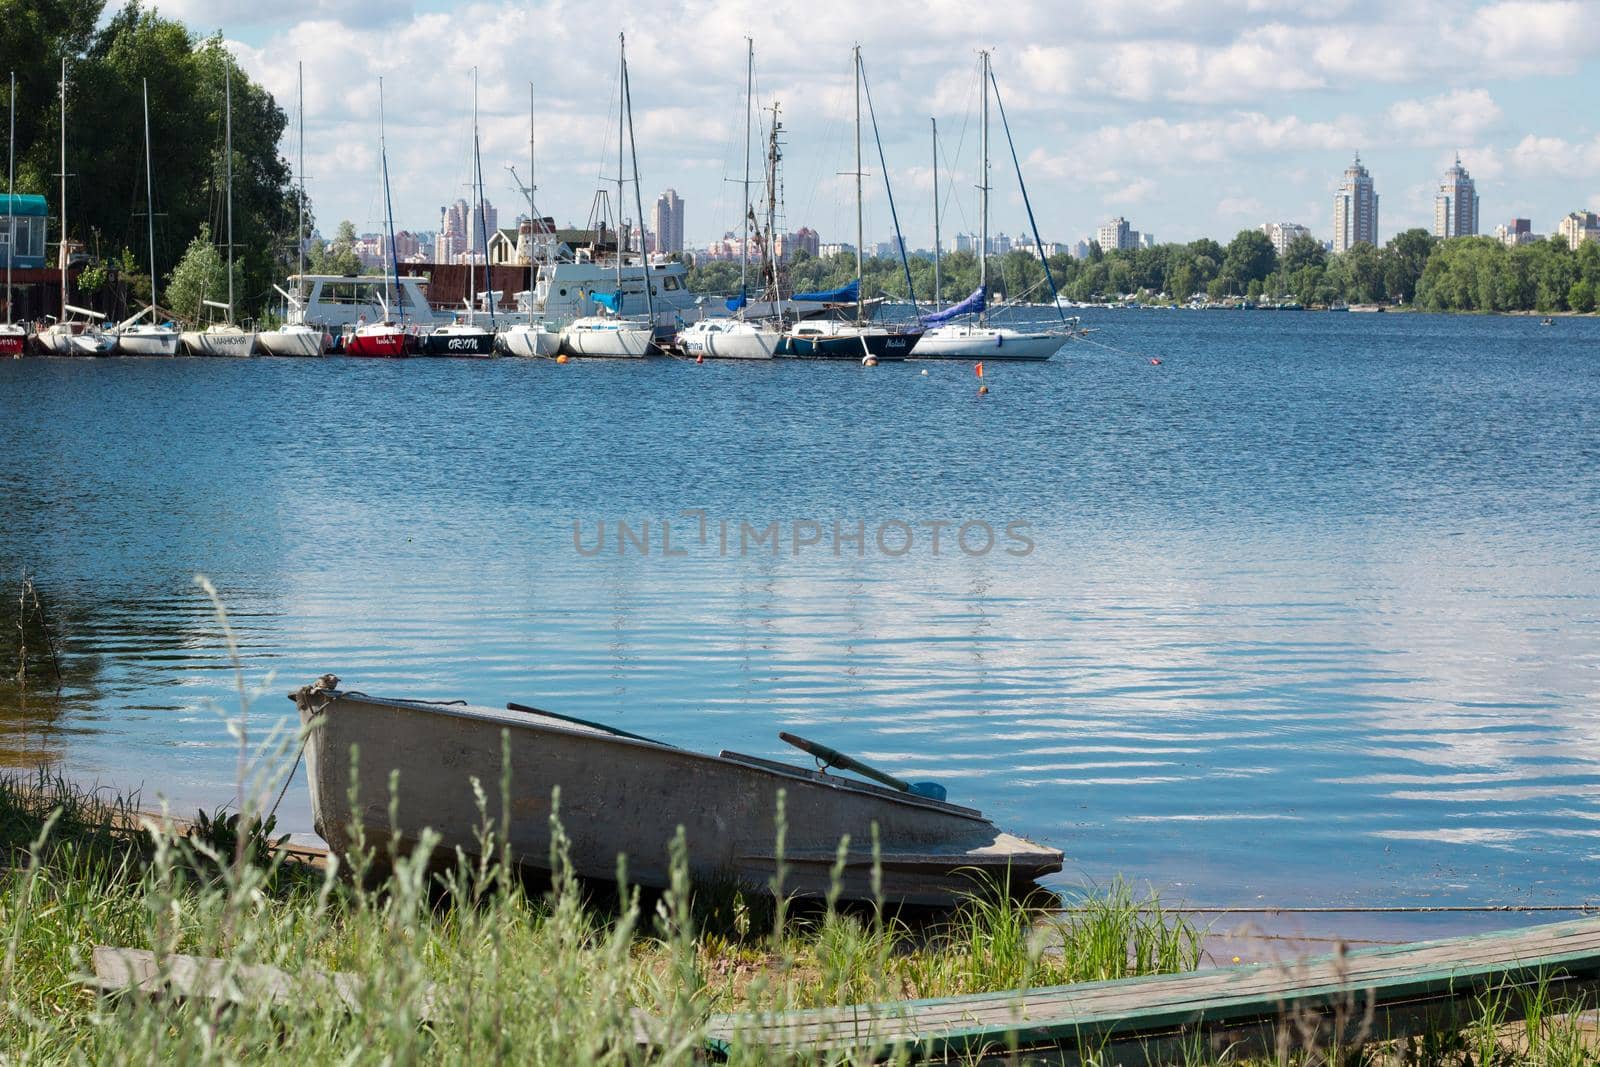 Small fishing boat with paddles stands near marina with sailing yachts on river bank